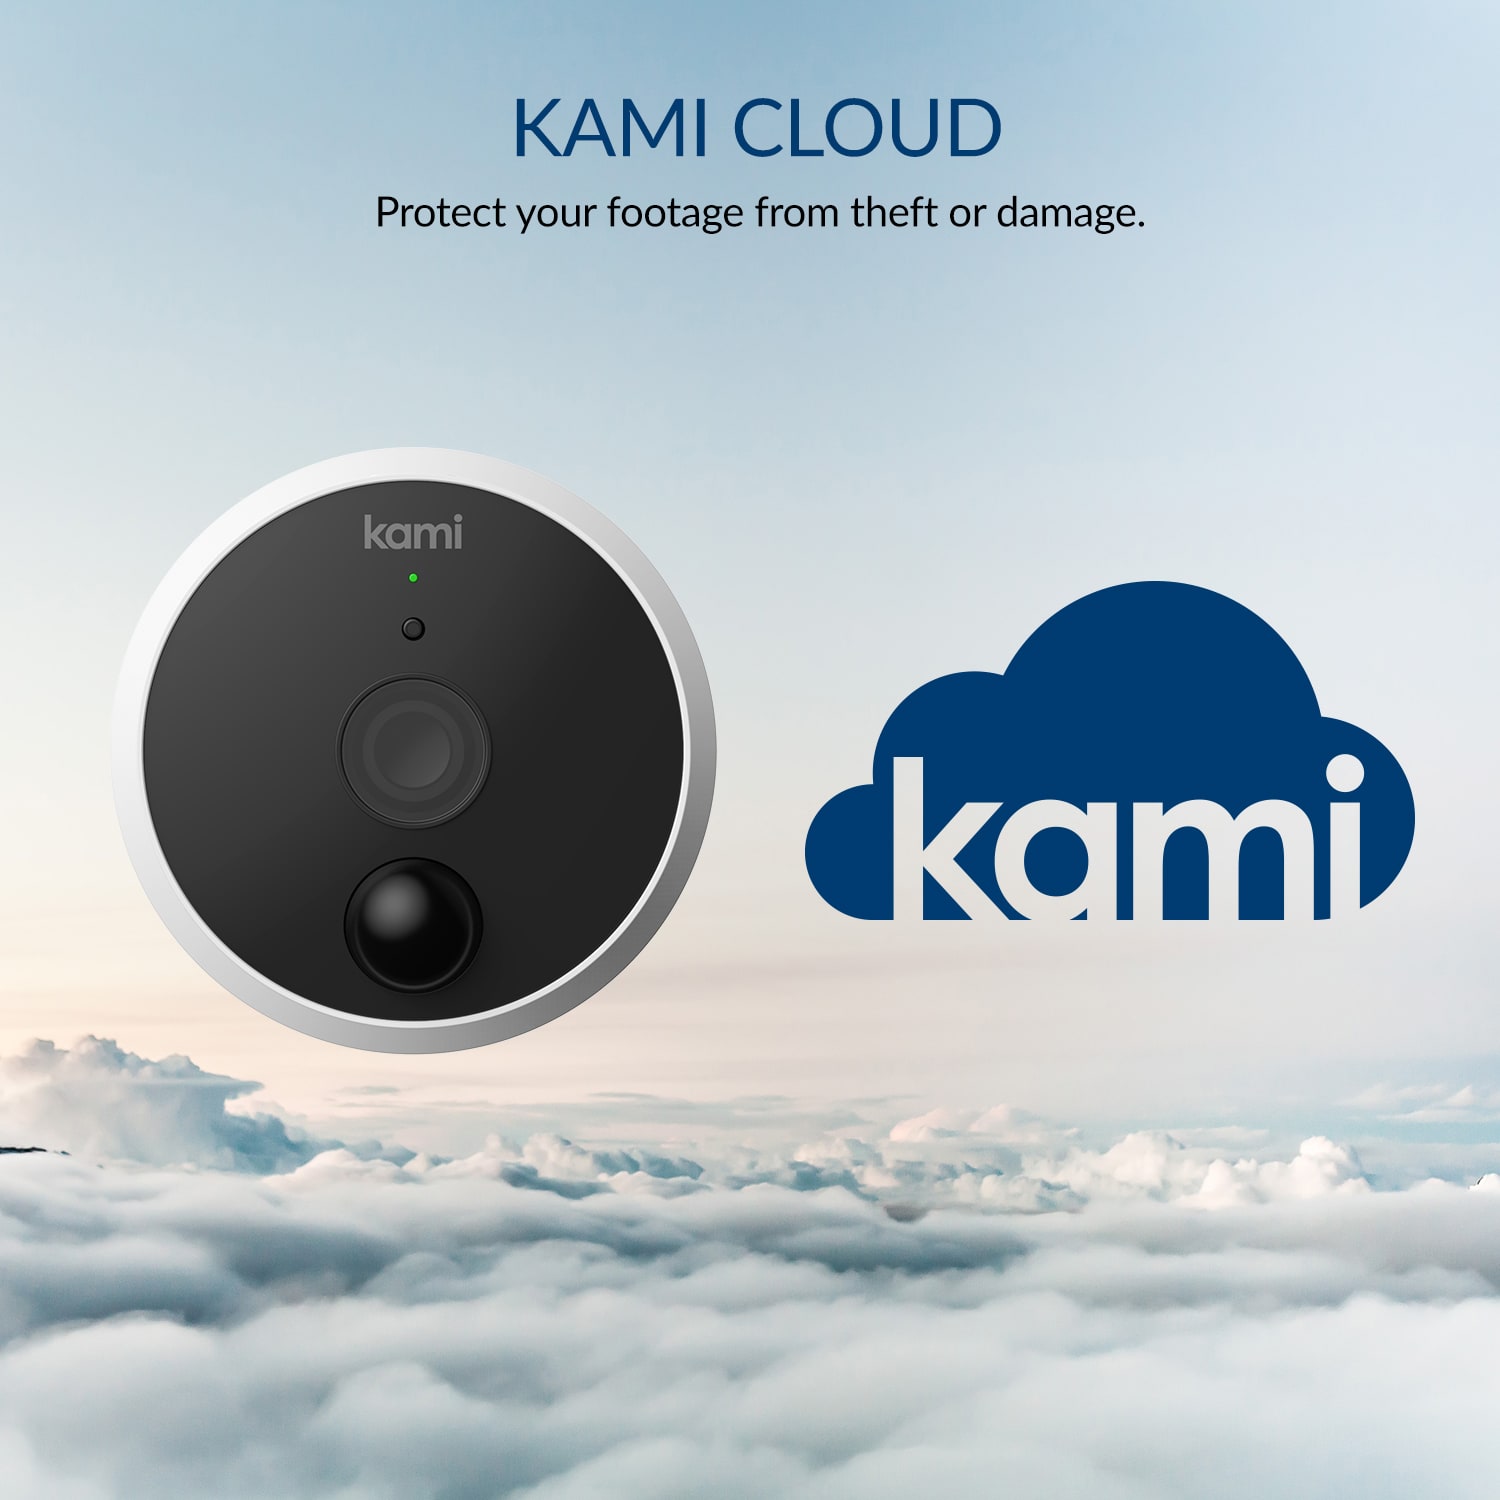 Kami Cloud - Protect your footage from theft or damage